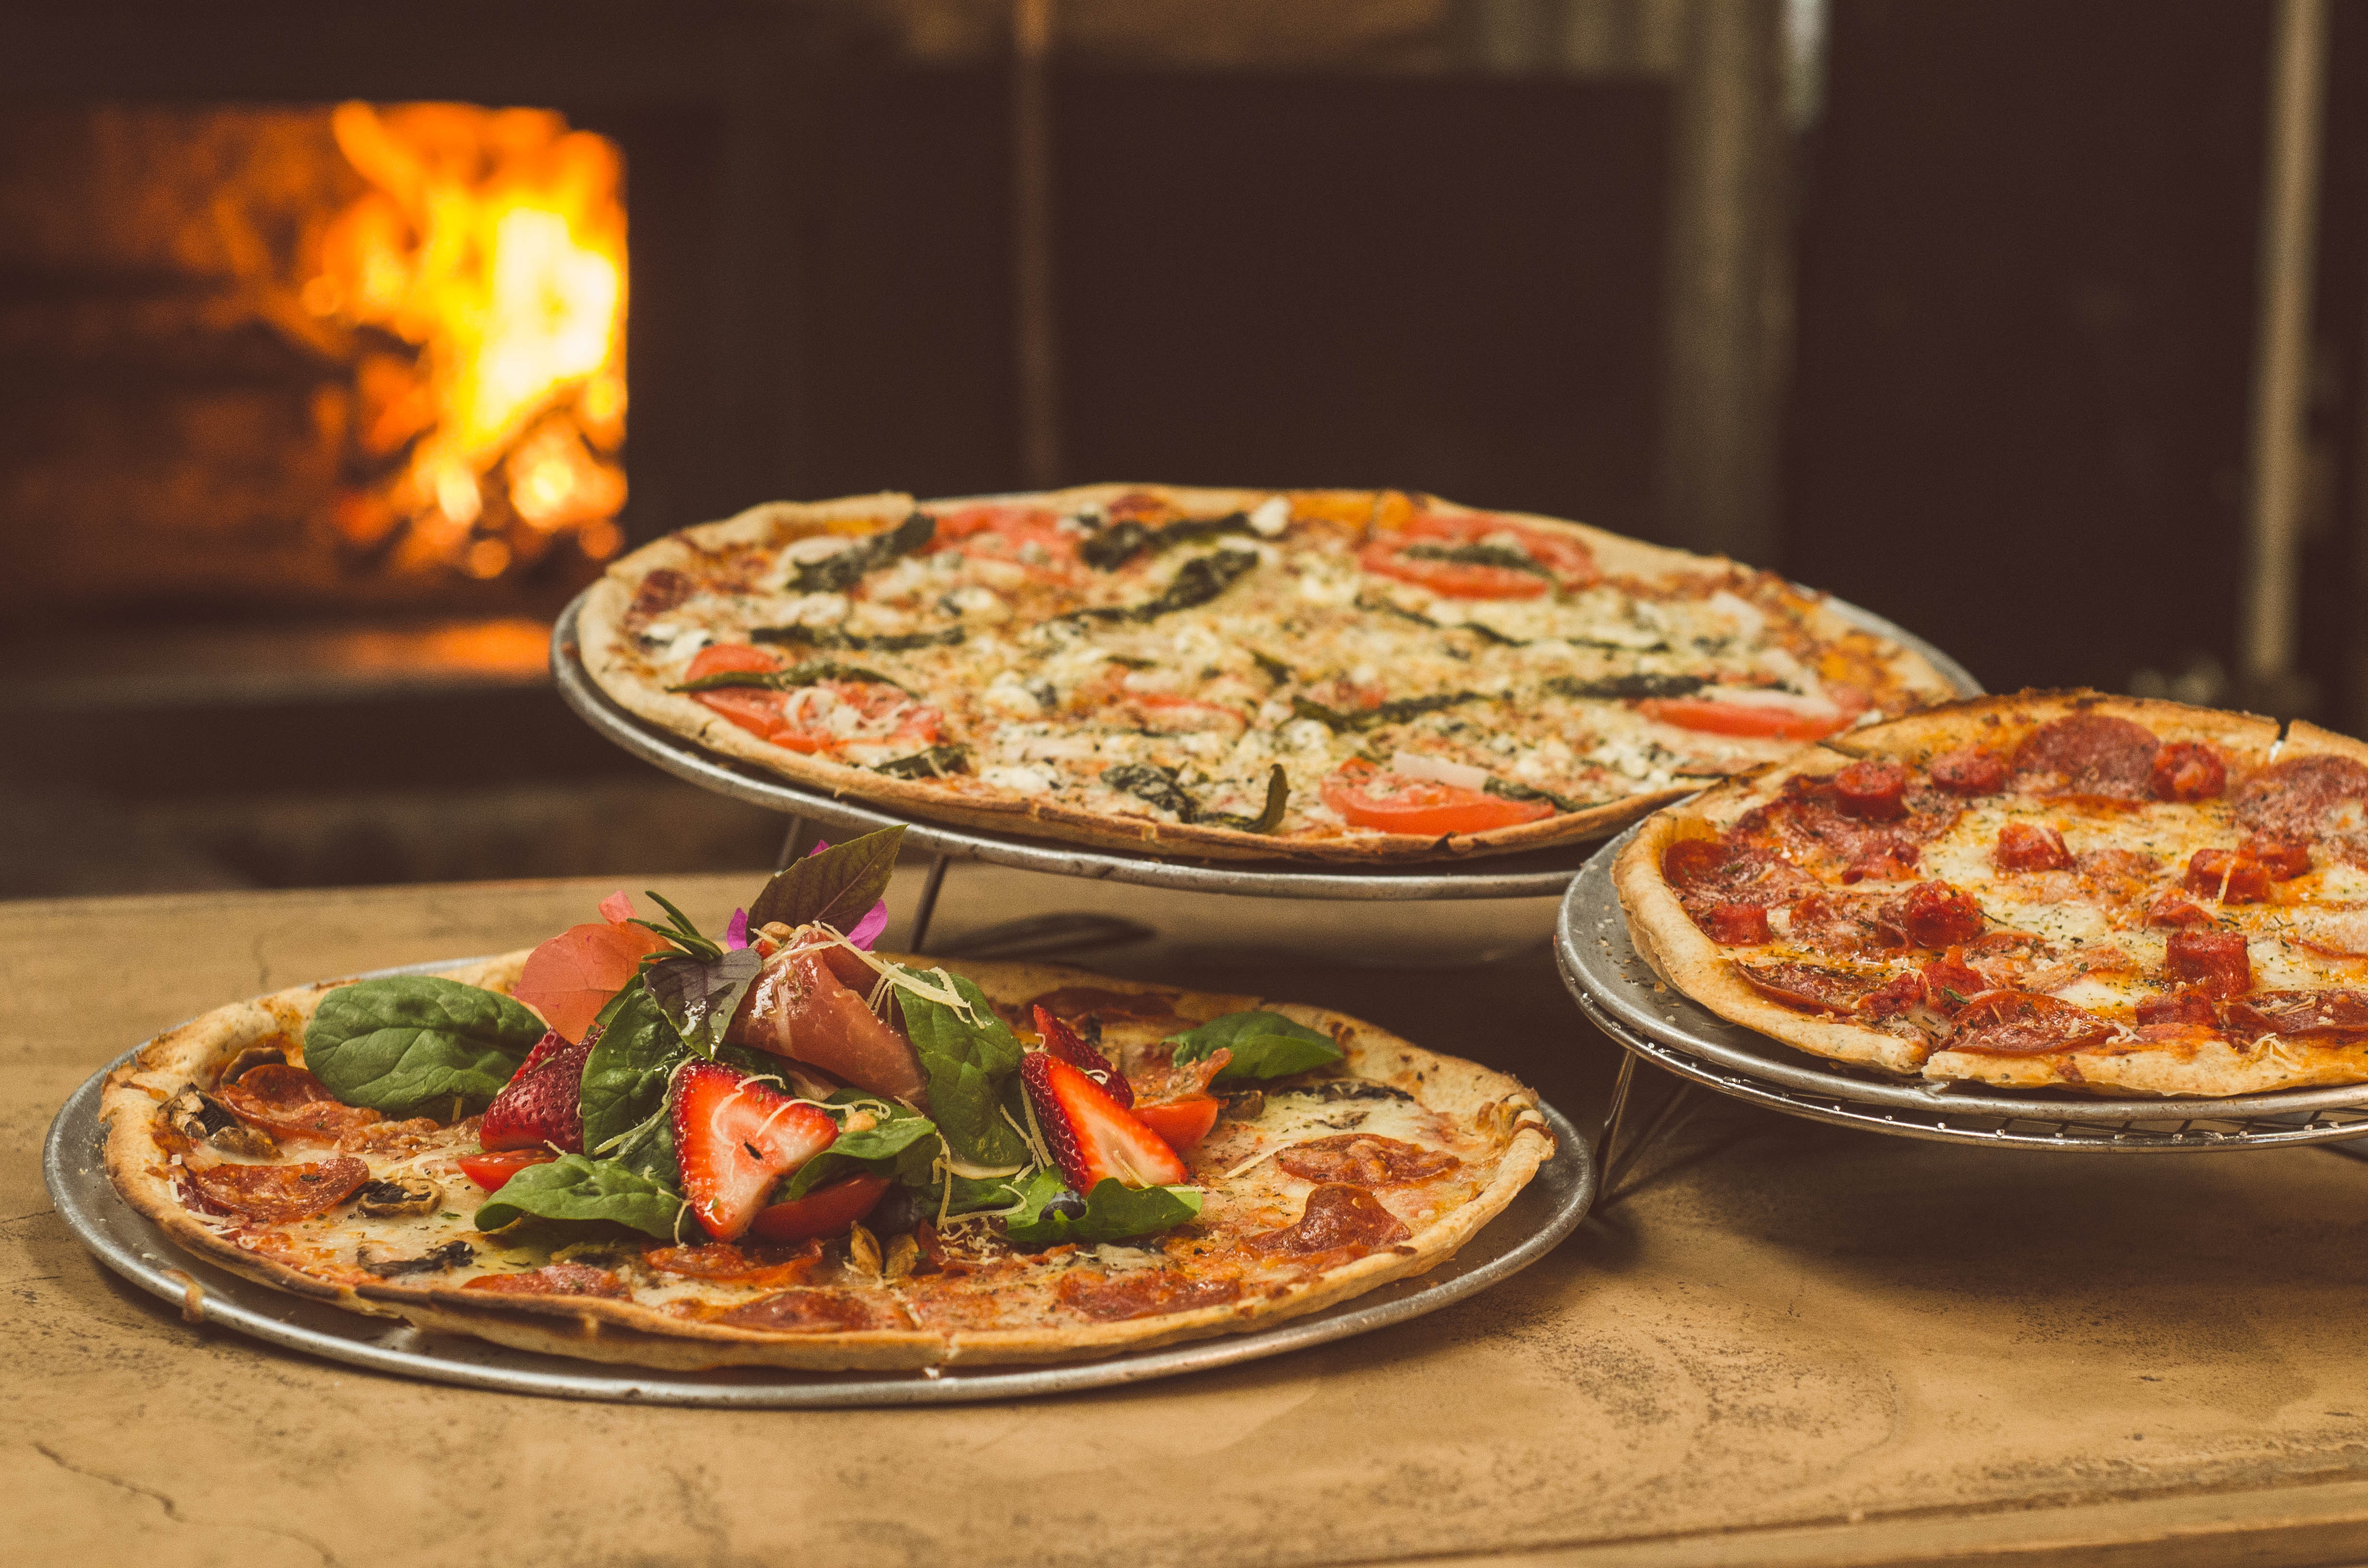 Three pizzas on pans in front of a fire place.